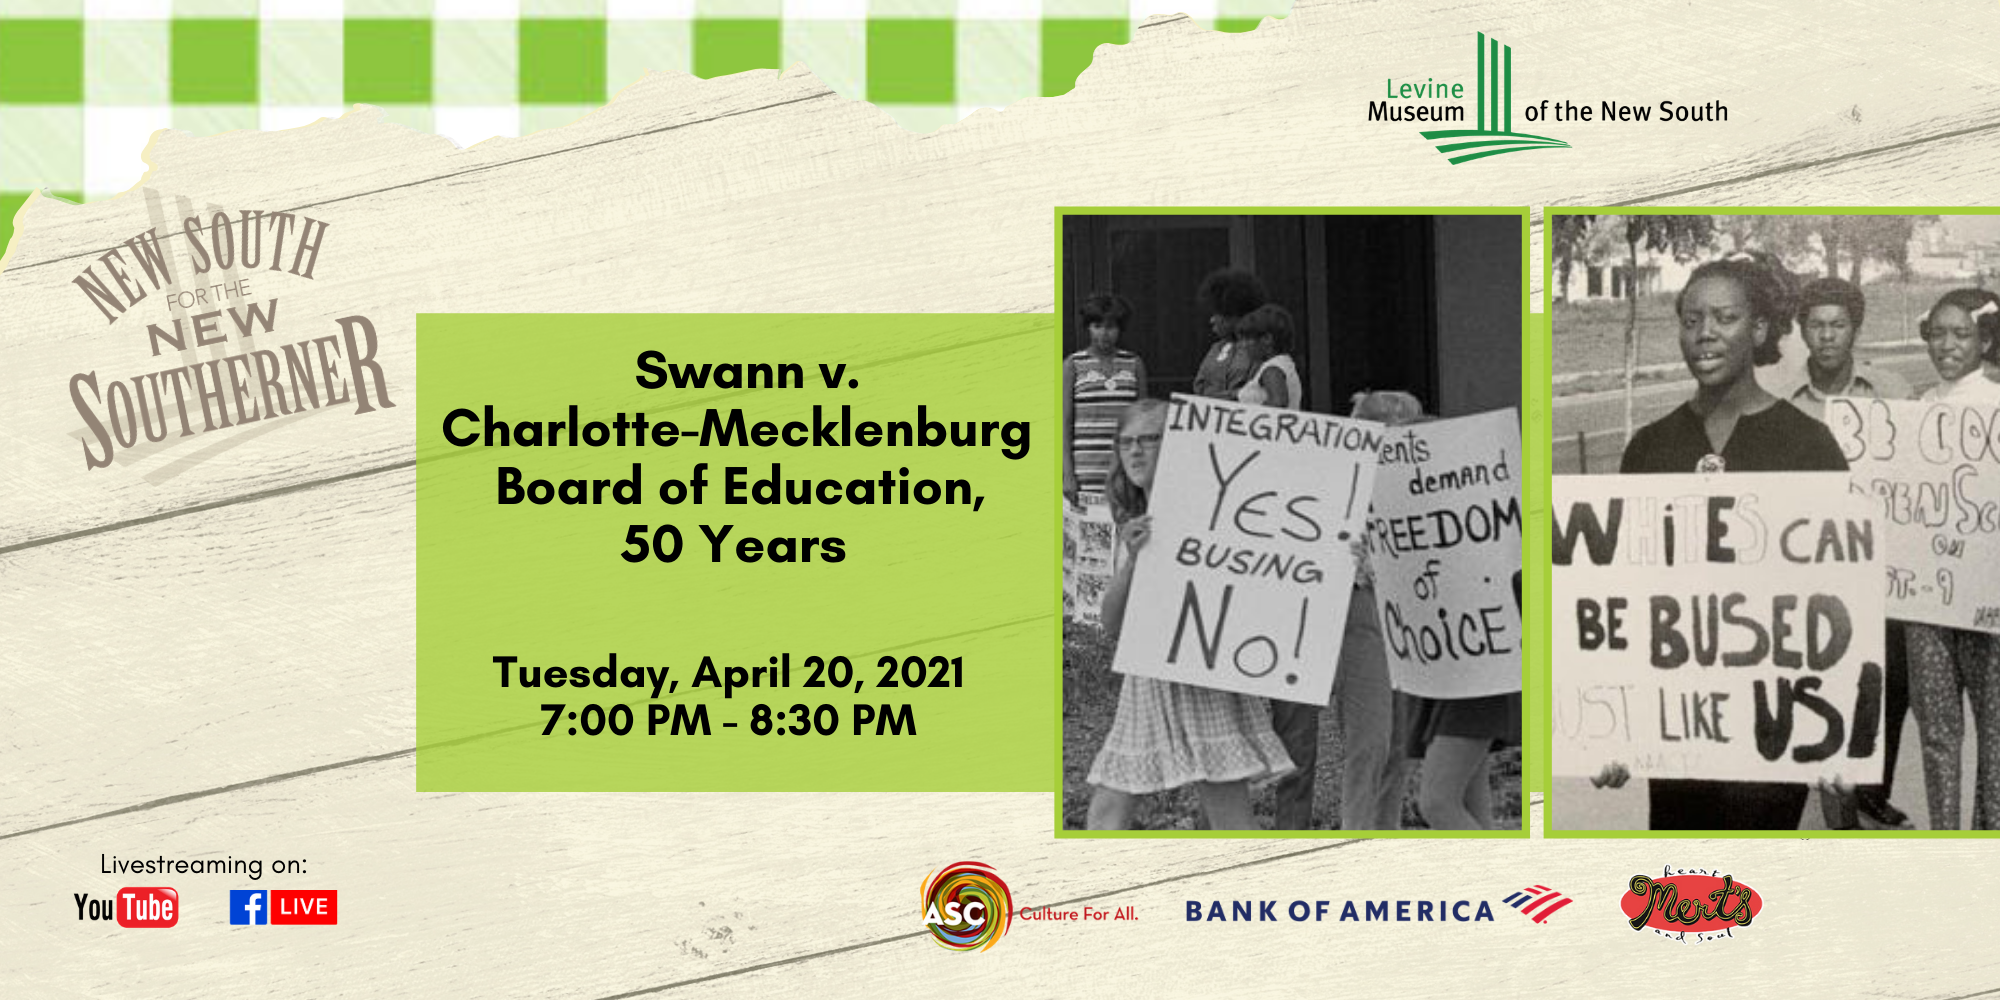 Levine Museum of the New South NSFNS: Swann v. Charlotte-Mecklenburg Board of Education, 50 Years Event Image